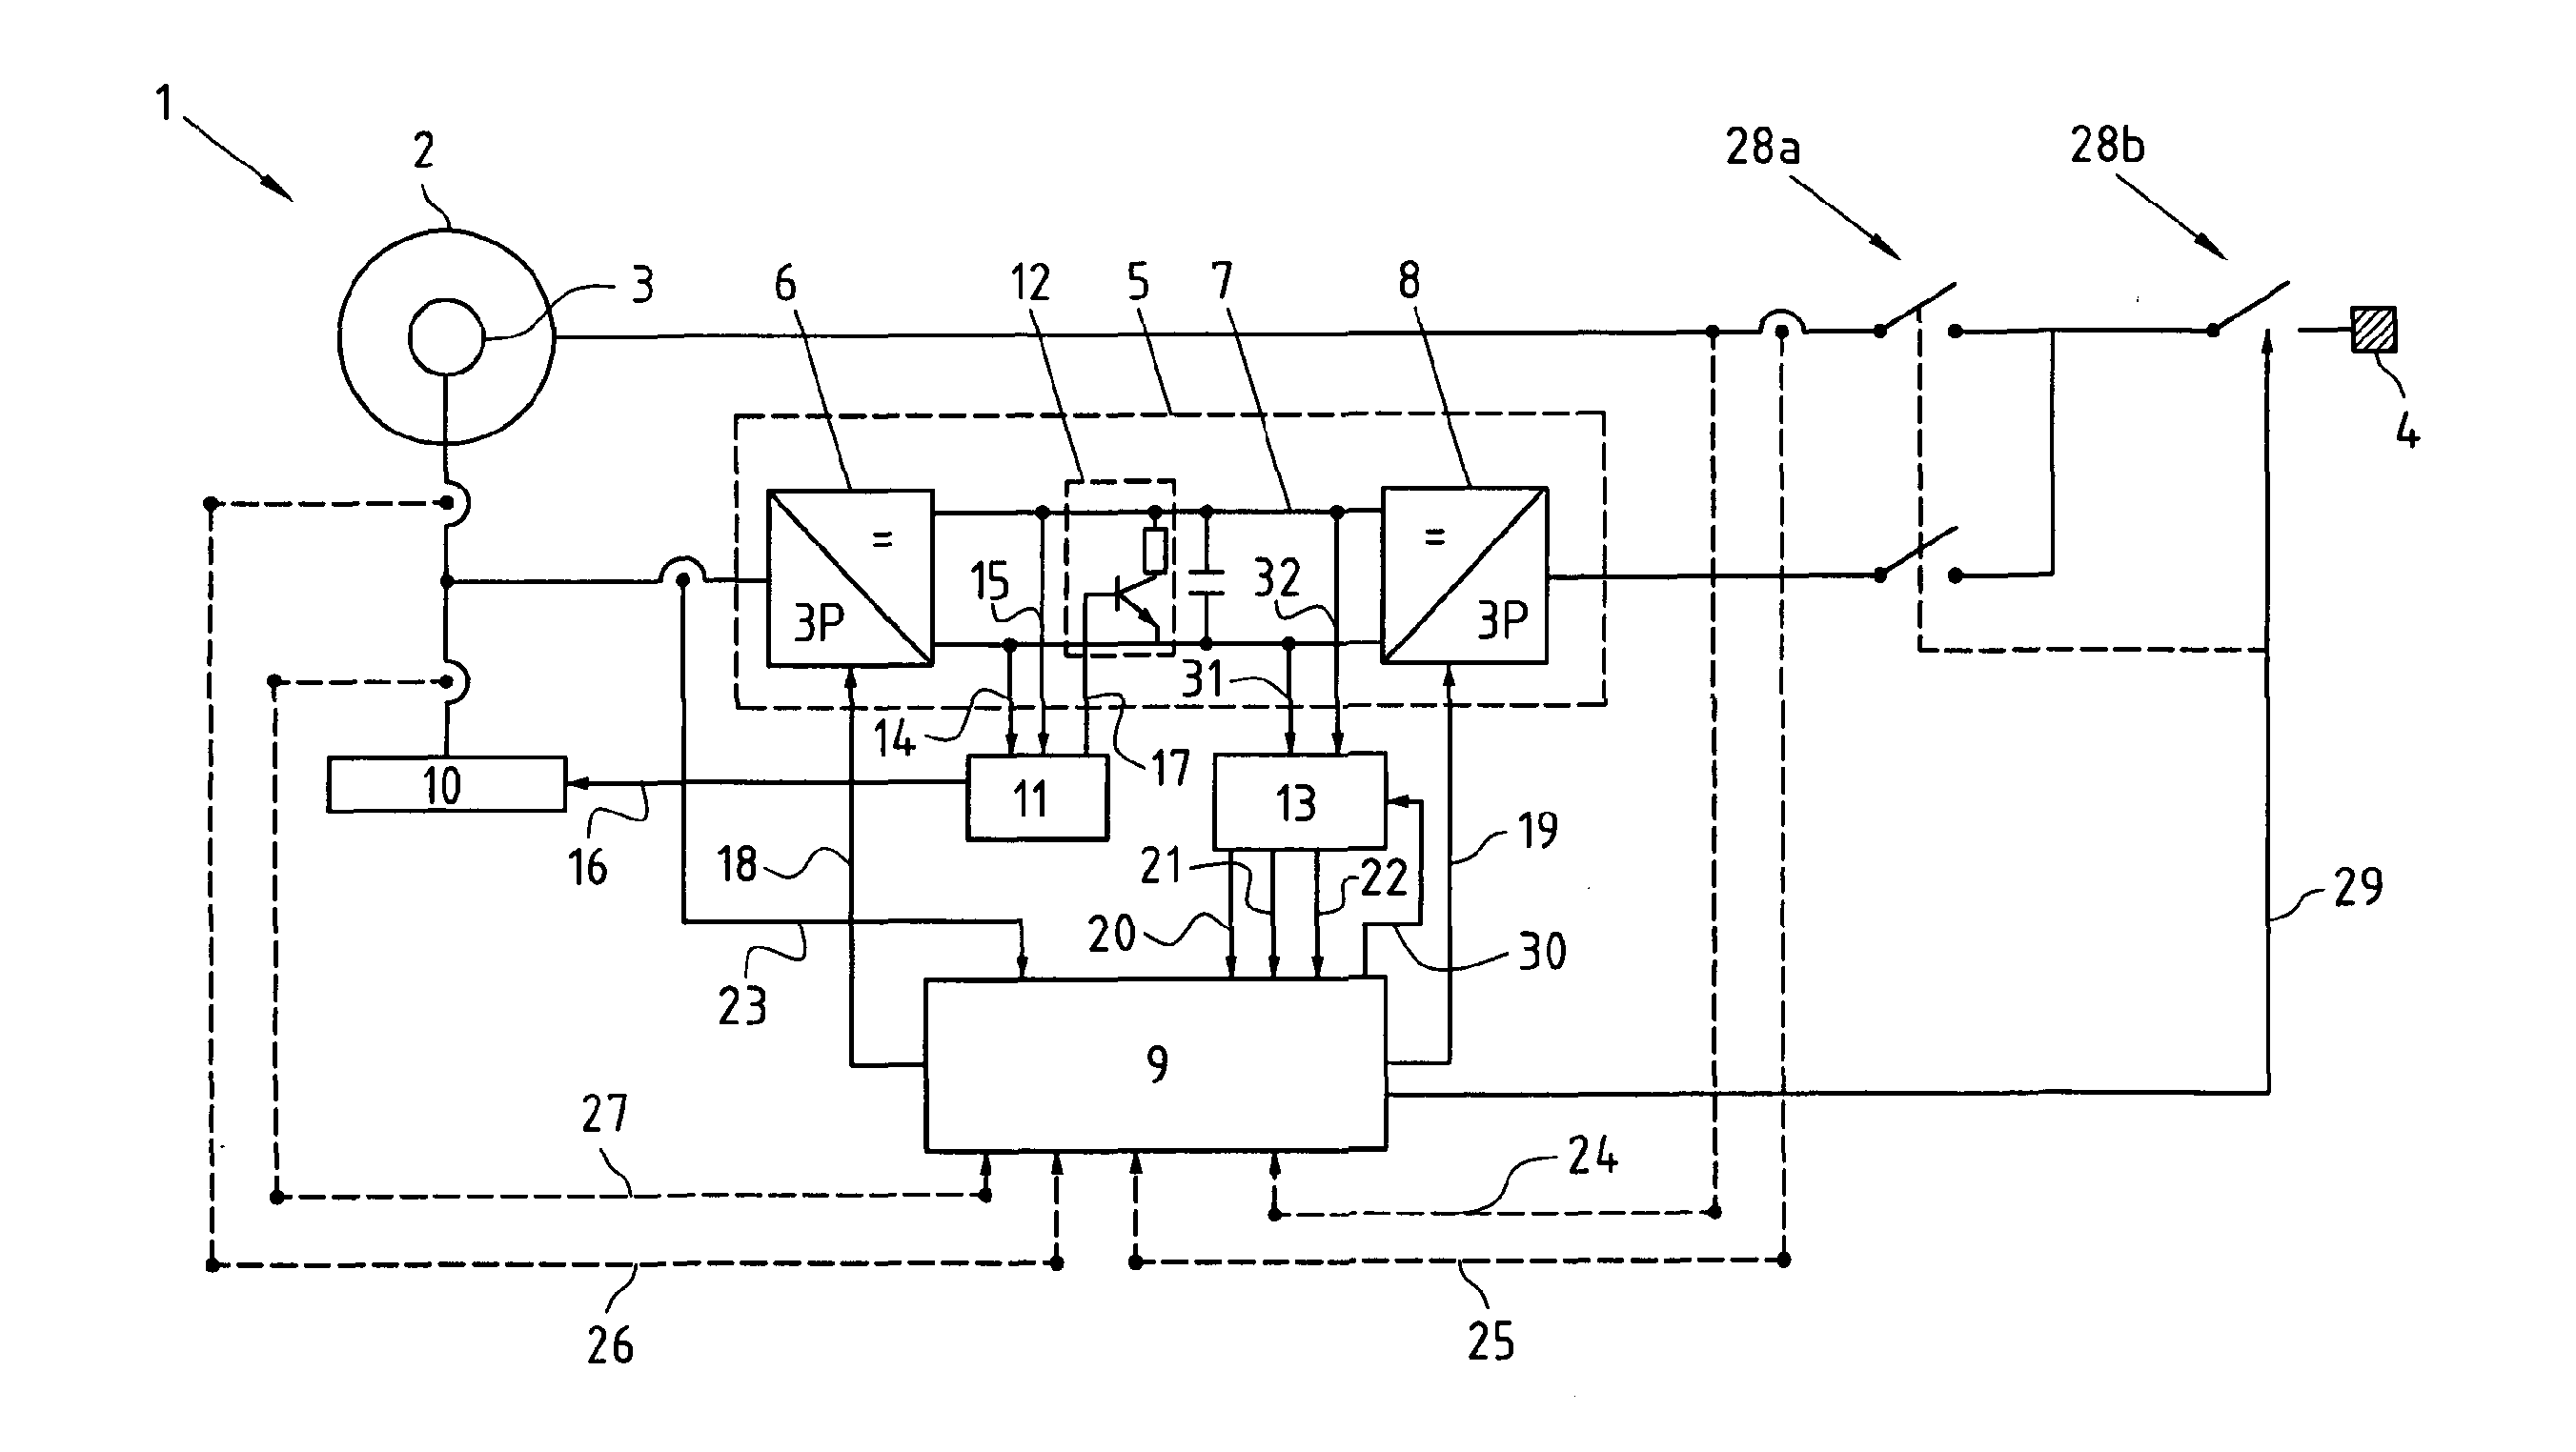 Protection System of a Doubly-fed Induction Machine